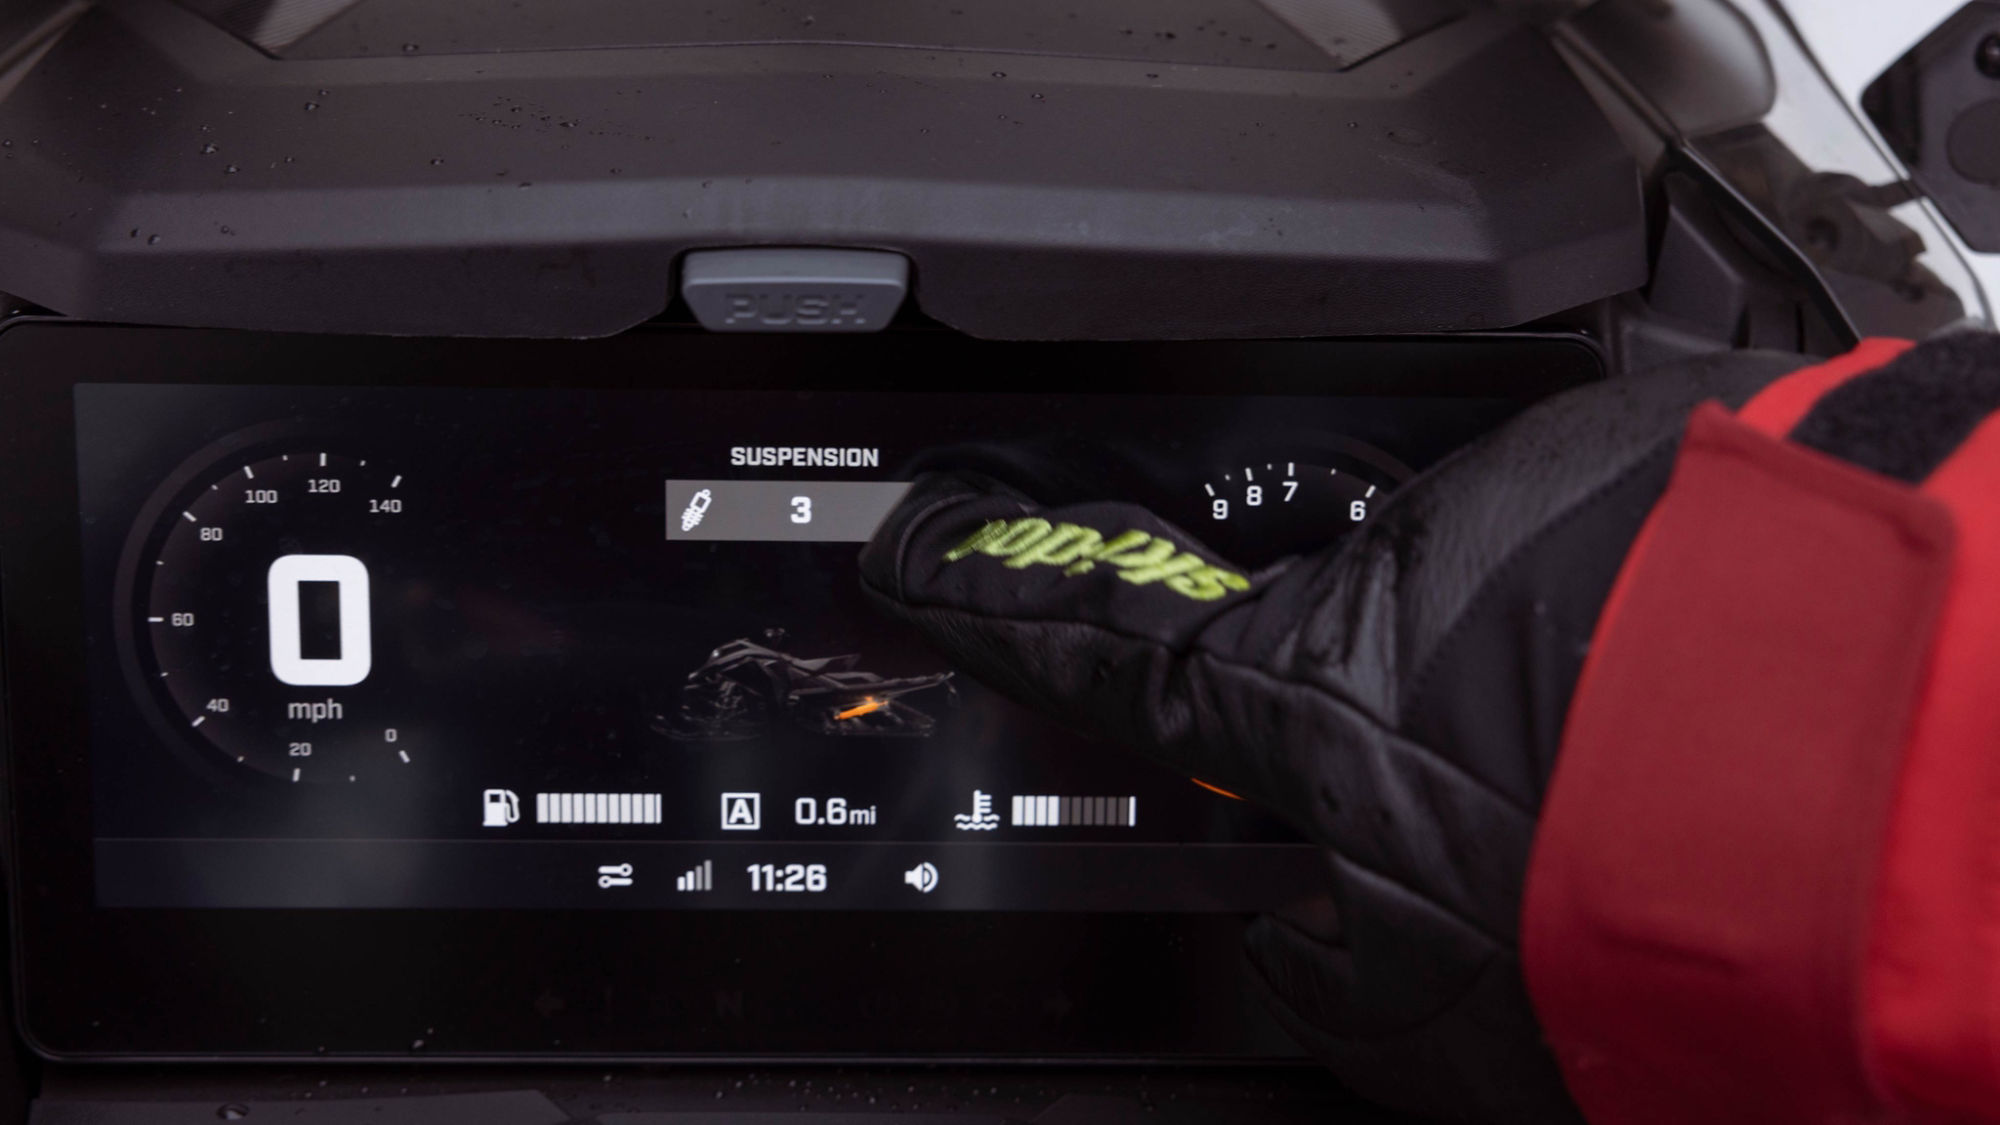 Using the 10.25 inch touchscreen display on a 2025 Ski-Doo Renegade trail snowmobile